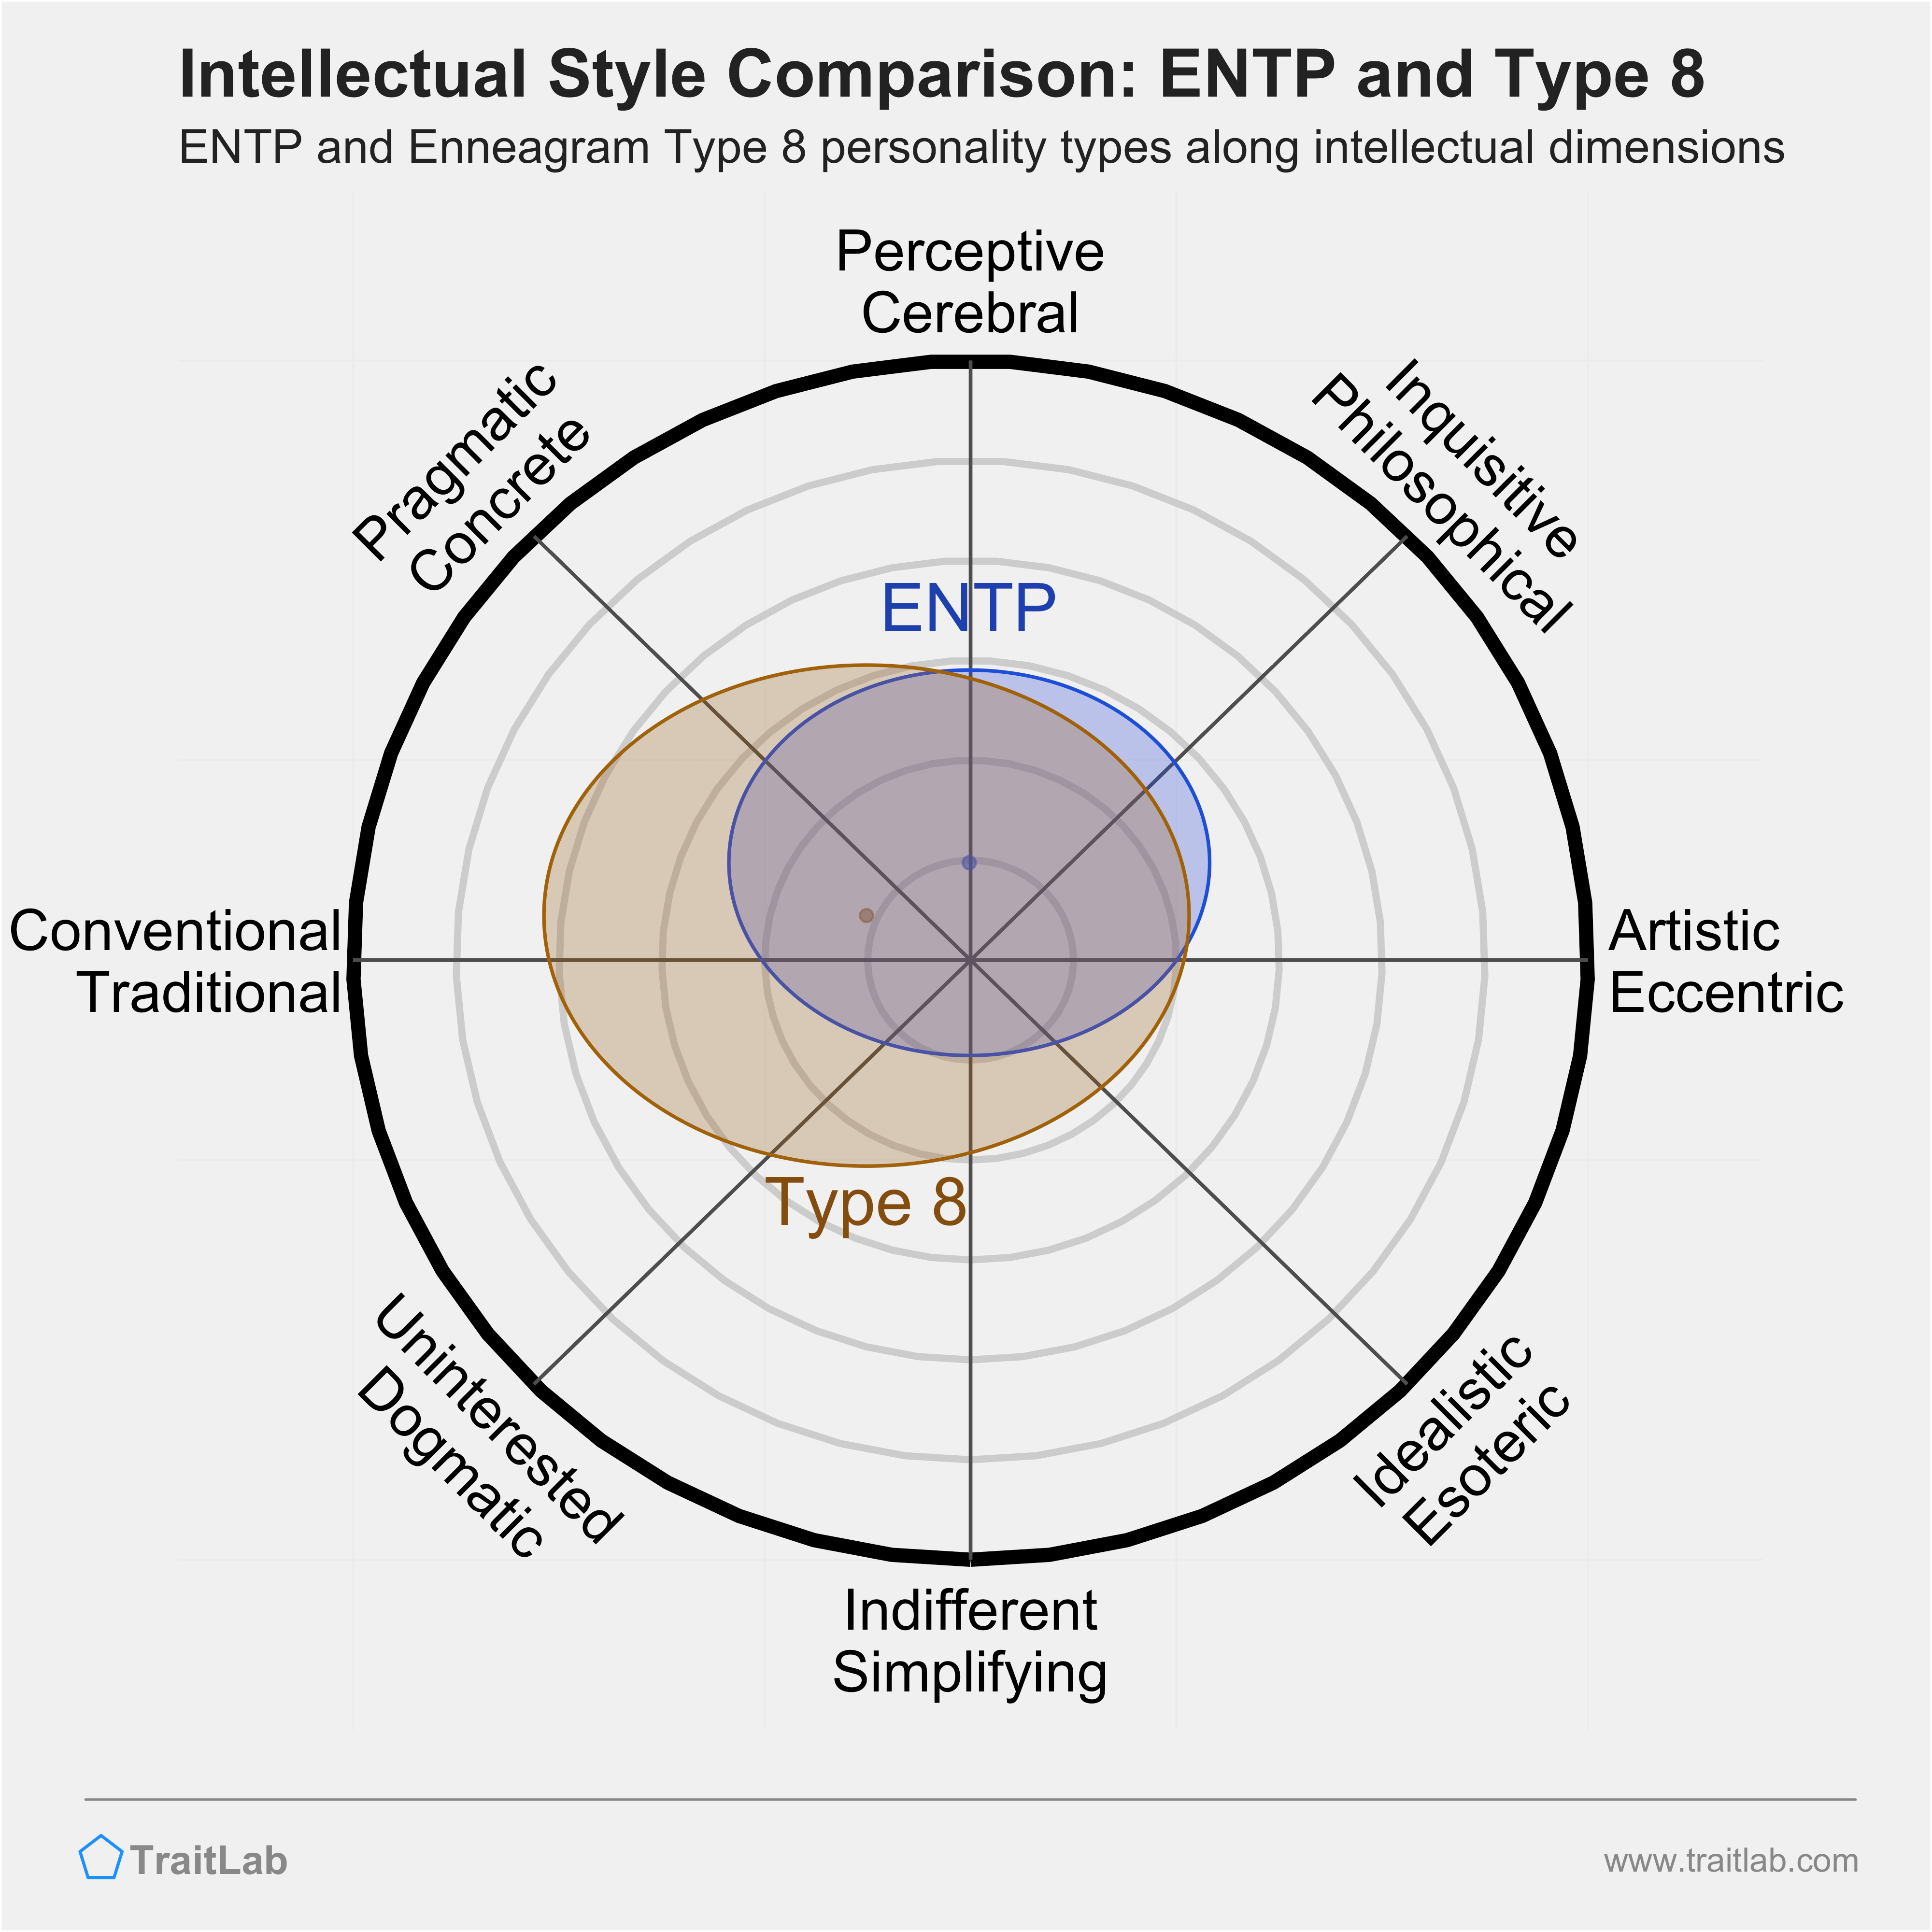 ENTP and Type 8 comparison across intellectual dimensions